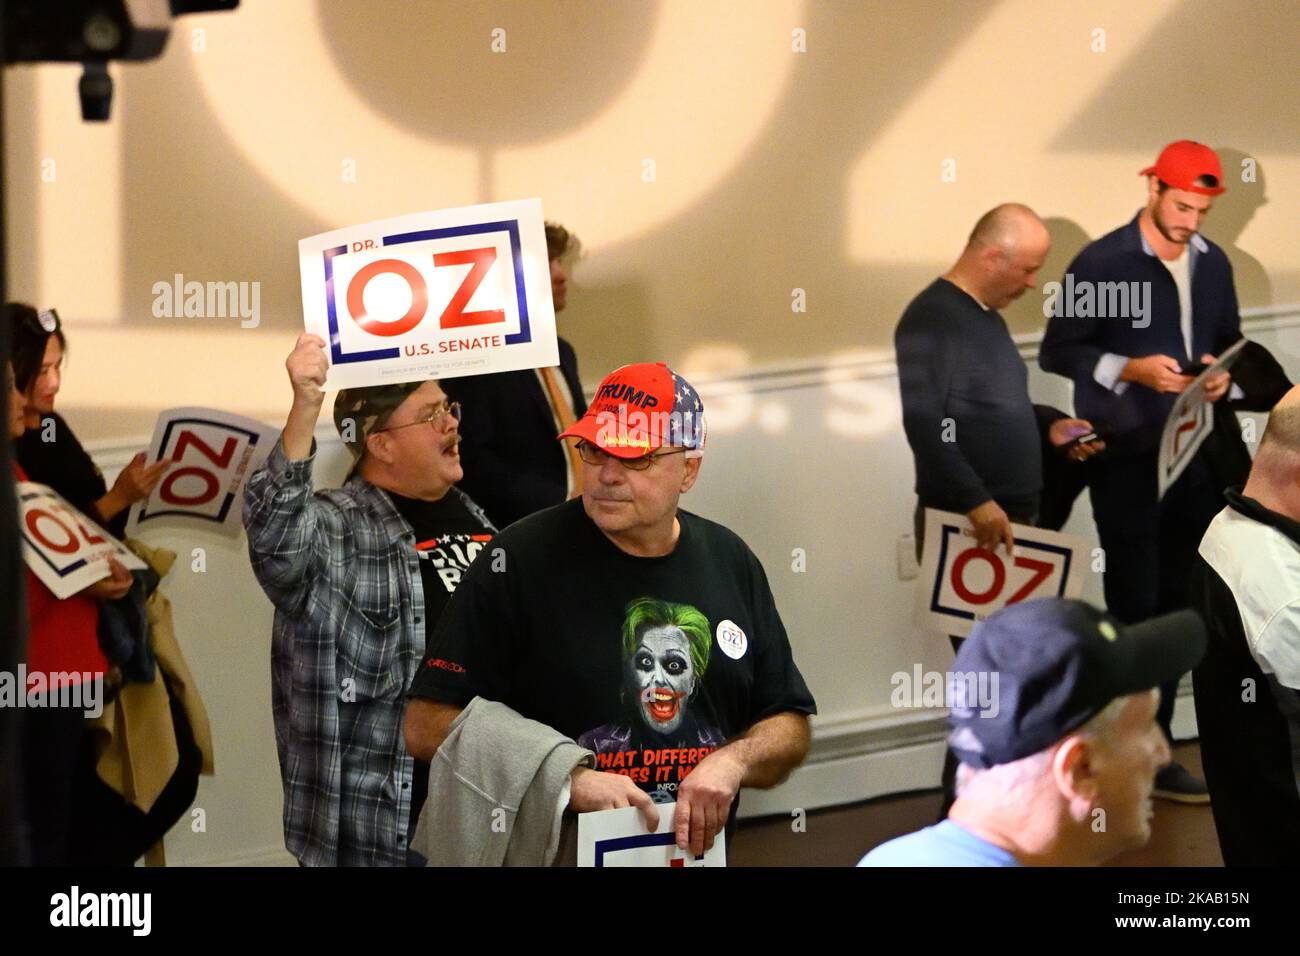 Bensalem, United States. 01st Nov, 2022. Dr. Mehmet Oz, Republican candidate for U.S. Senate holds a rally in Bensalem, PA, USA on November 1. 2022. With a week left until Election Day, Oz and his opposition, Democratic candidate PA Lt. Gov. John Fetterman, hold rallies around the Keystone State to find support for their campaigns in a thigh and closed-watched race of a Pennsylvania U.S. Senate seat. Credit: OOgImages/Alamy Live News Stock Photo